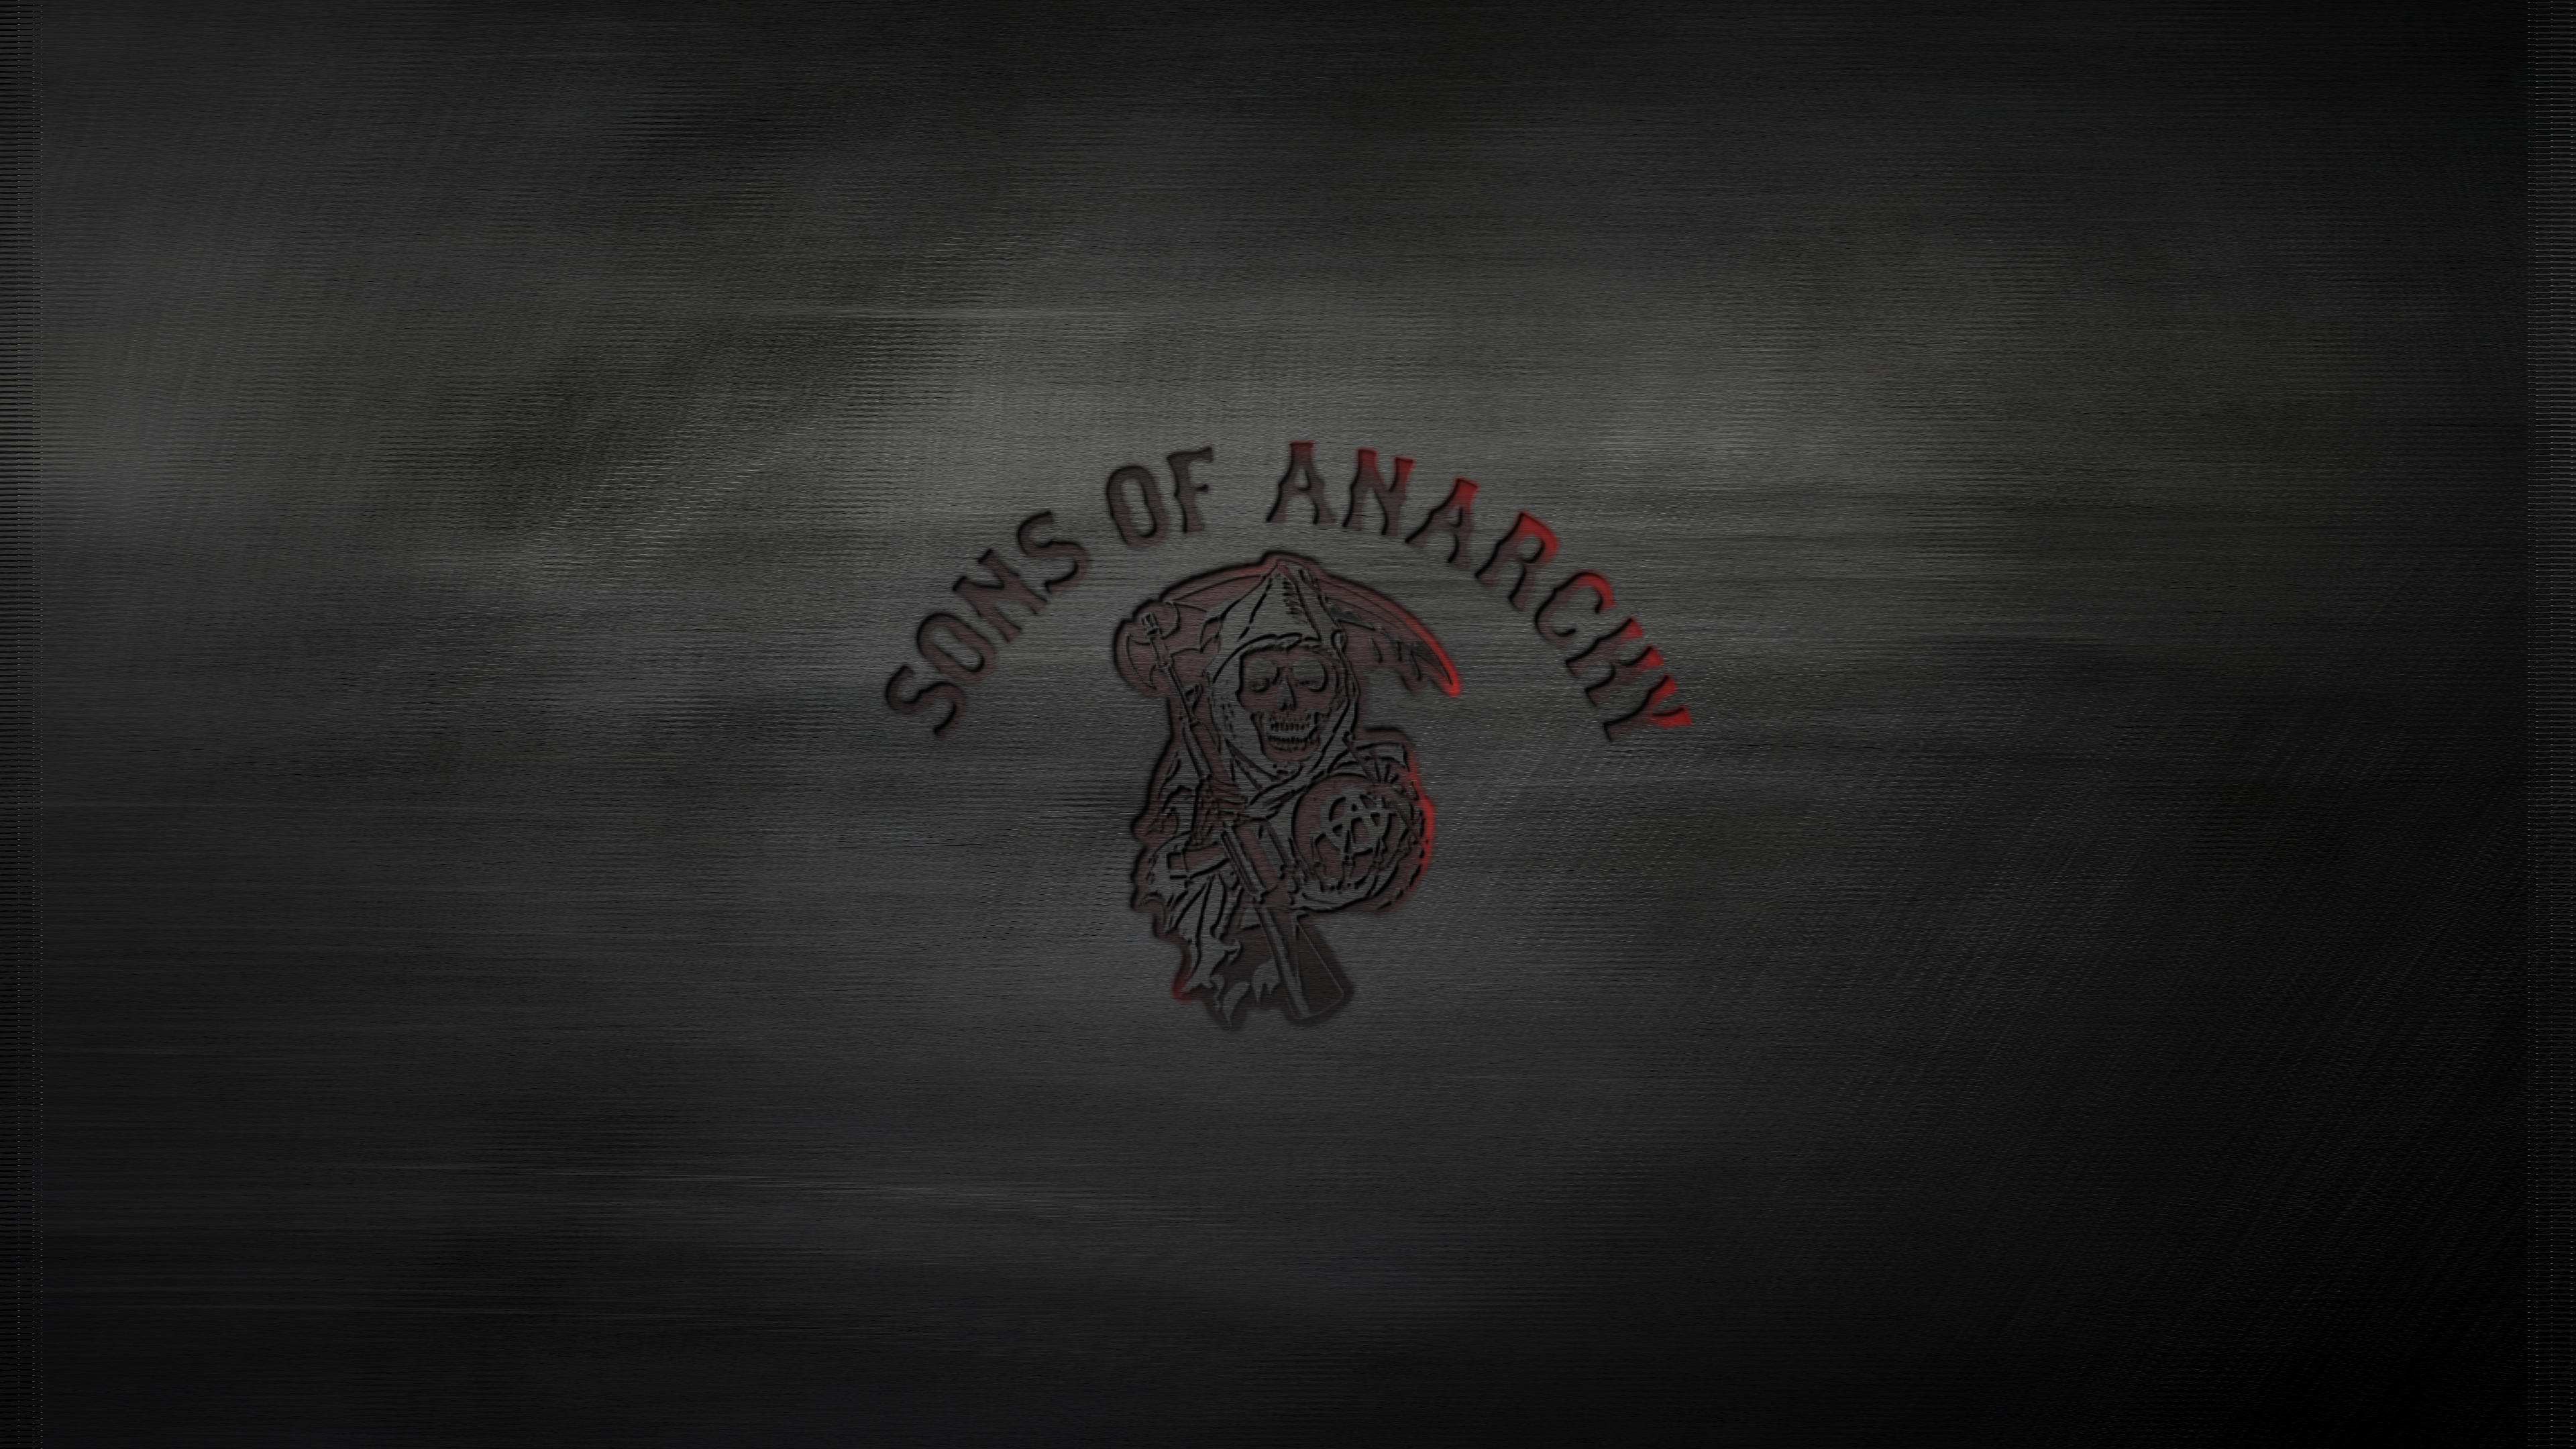 Live Wallpaper Sons Of Anarchy Pictures To Pin